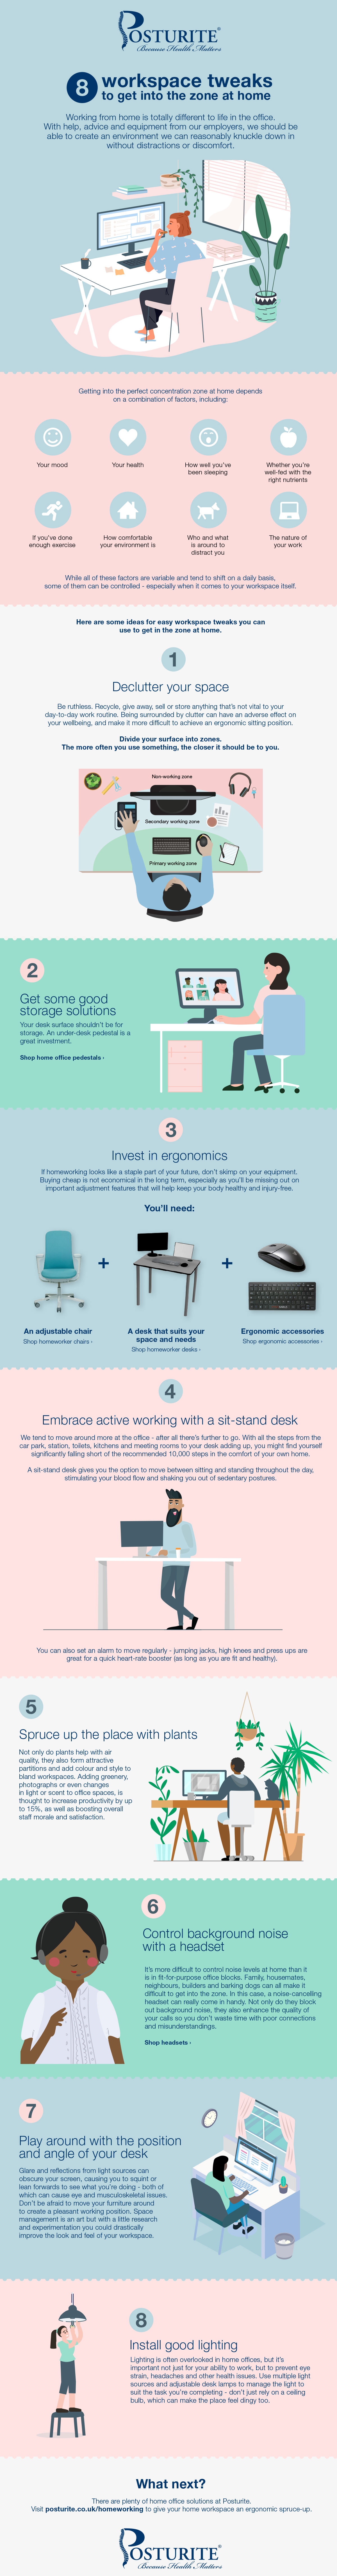 Posturite infographic depicting 8 ways to be more productive when you're working from home